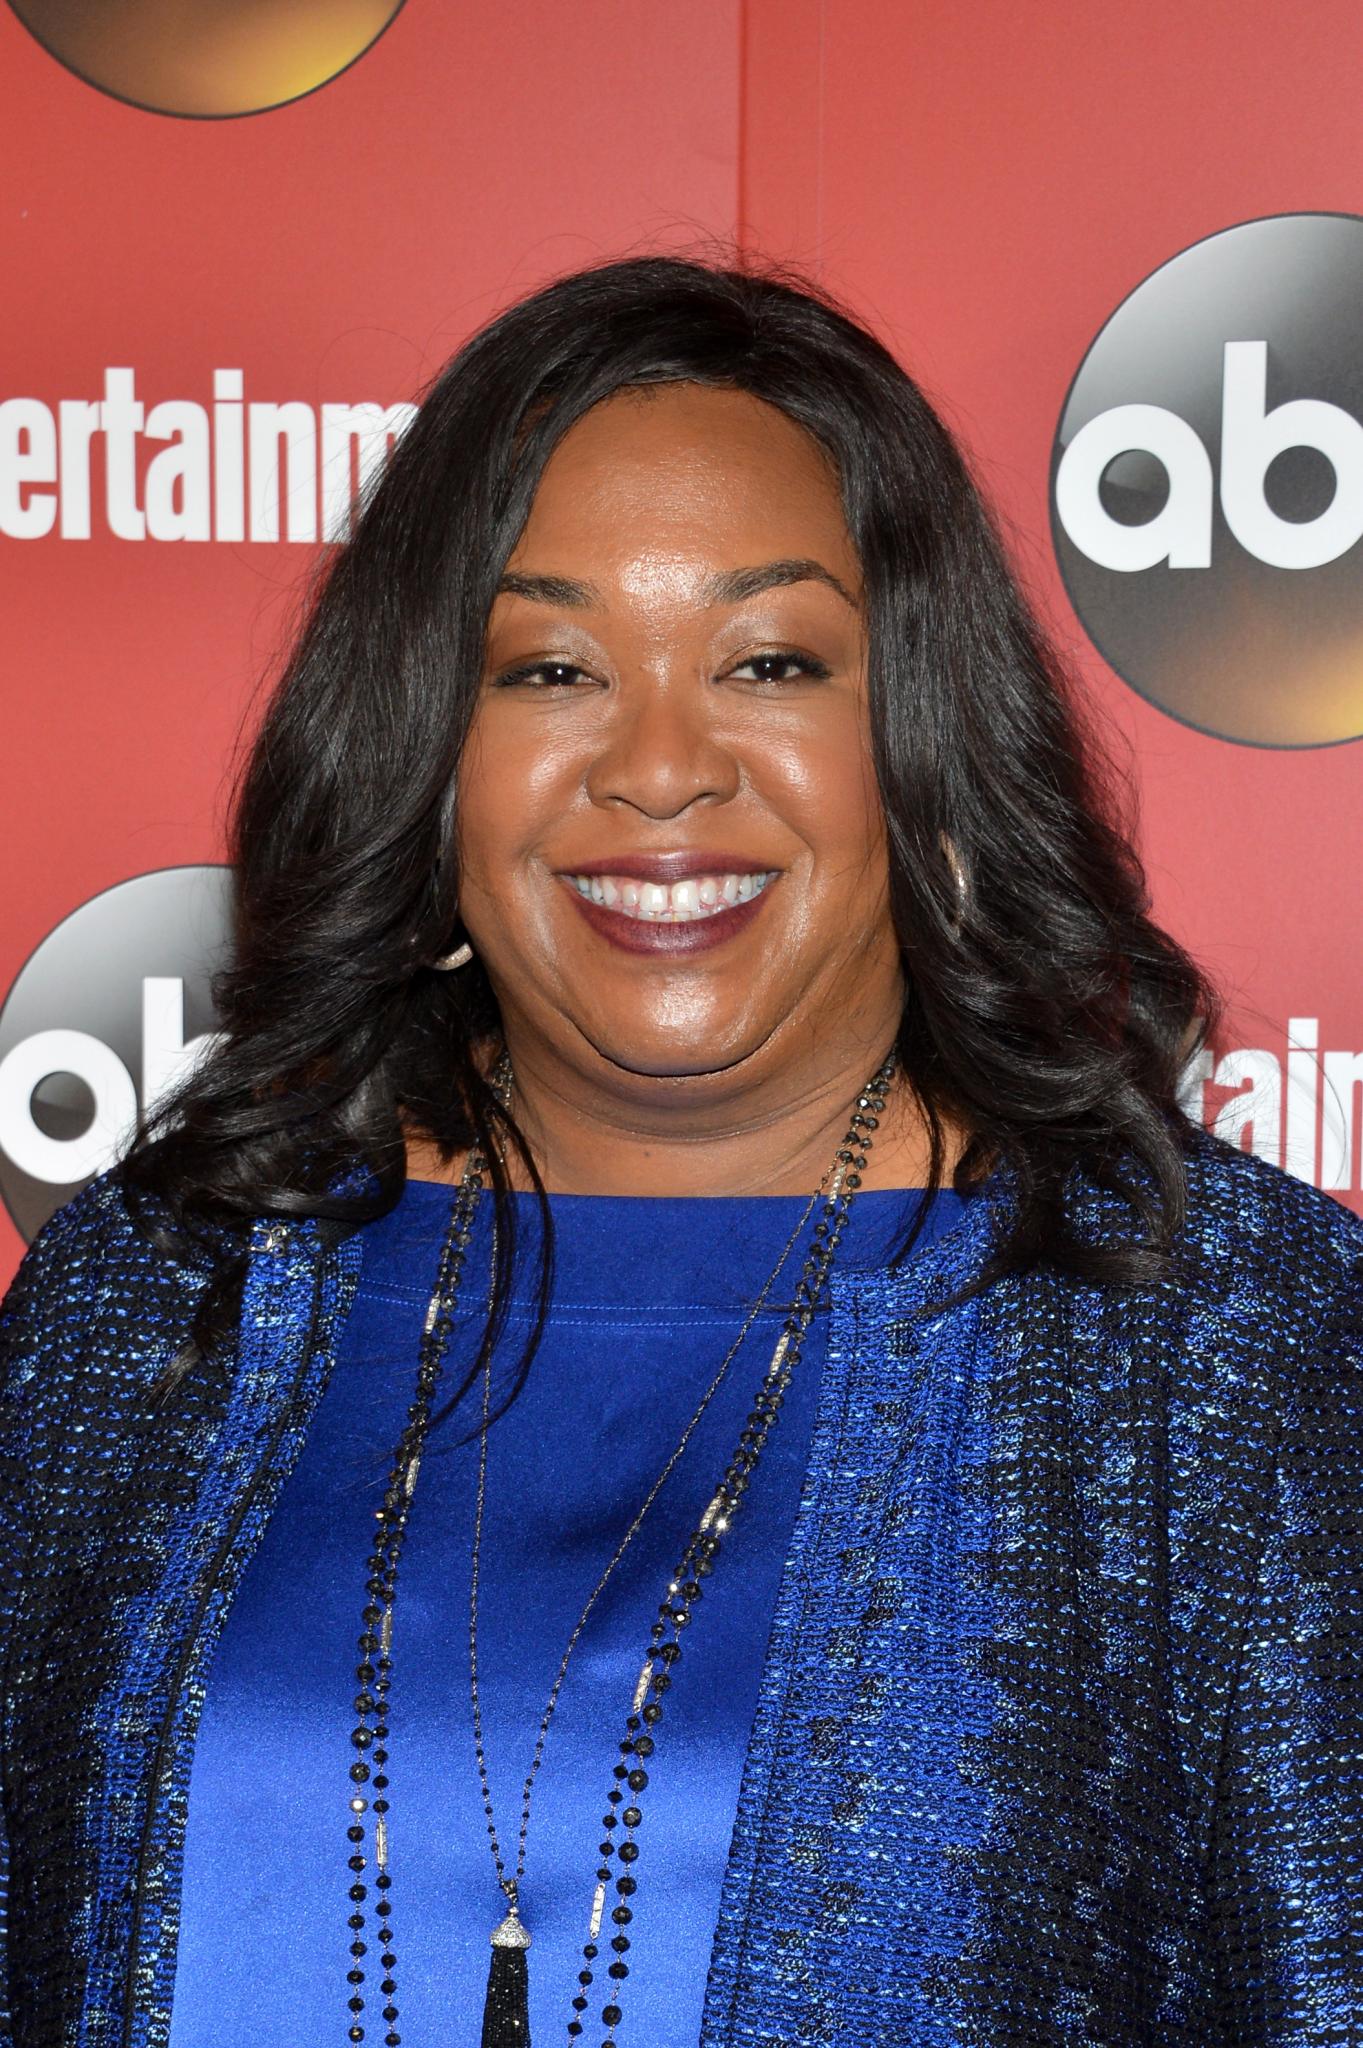 Shonda Rhimes Says Peabody Win was ‘A Complete Shock’